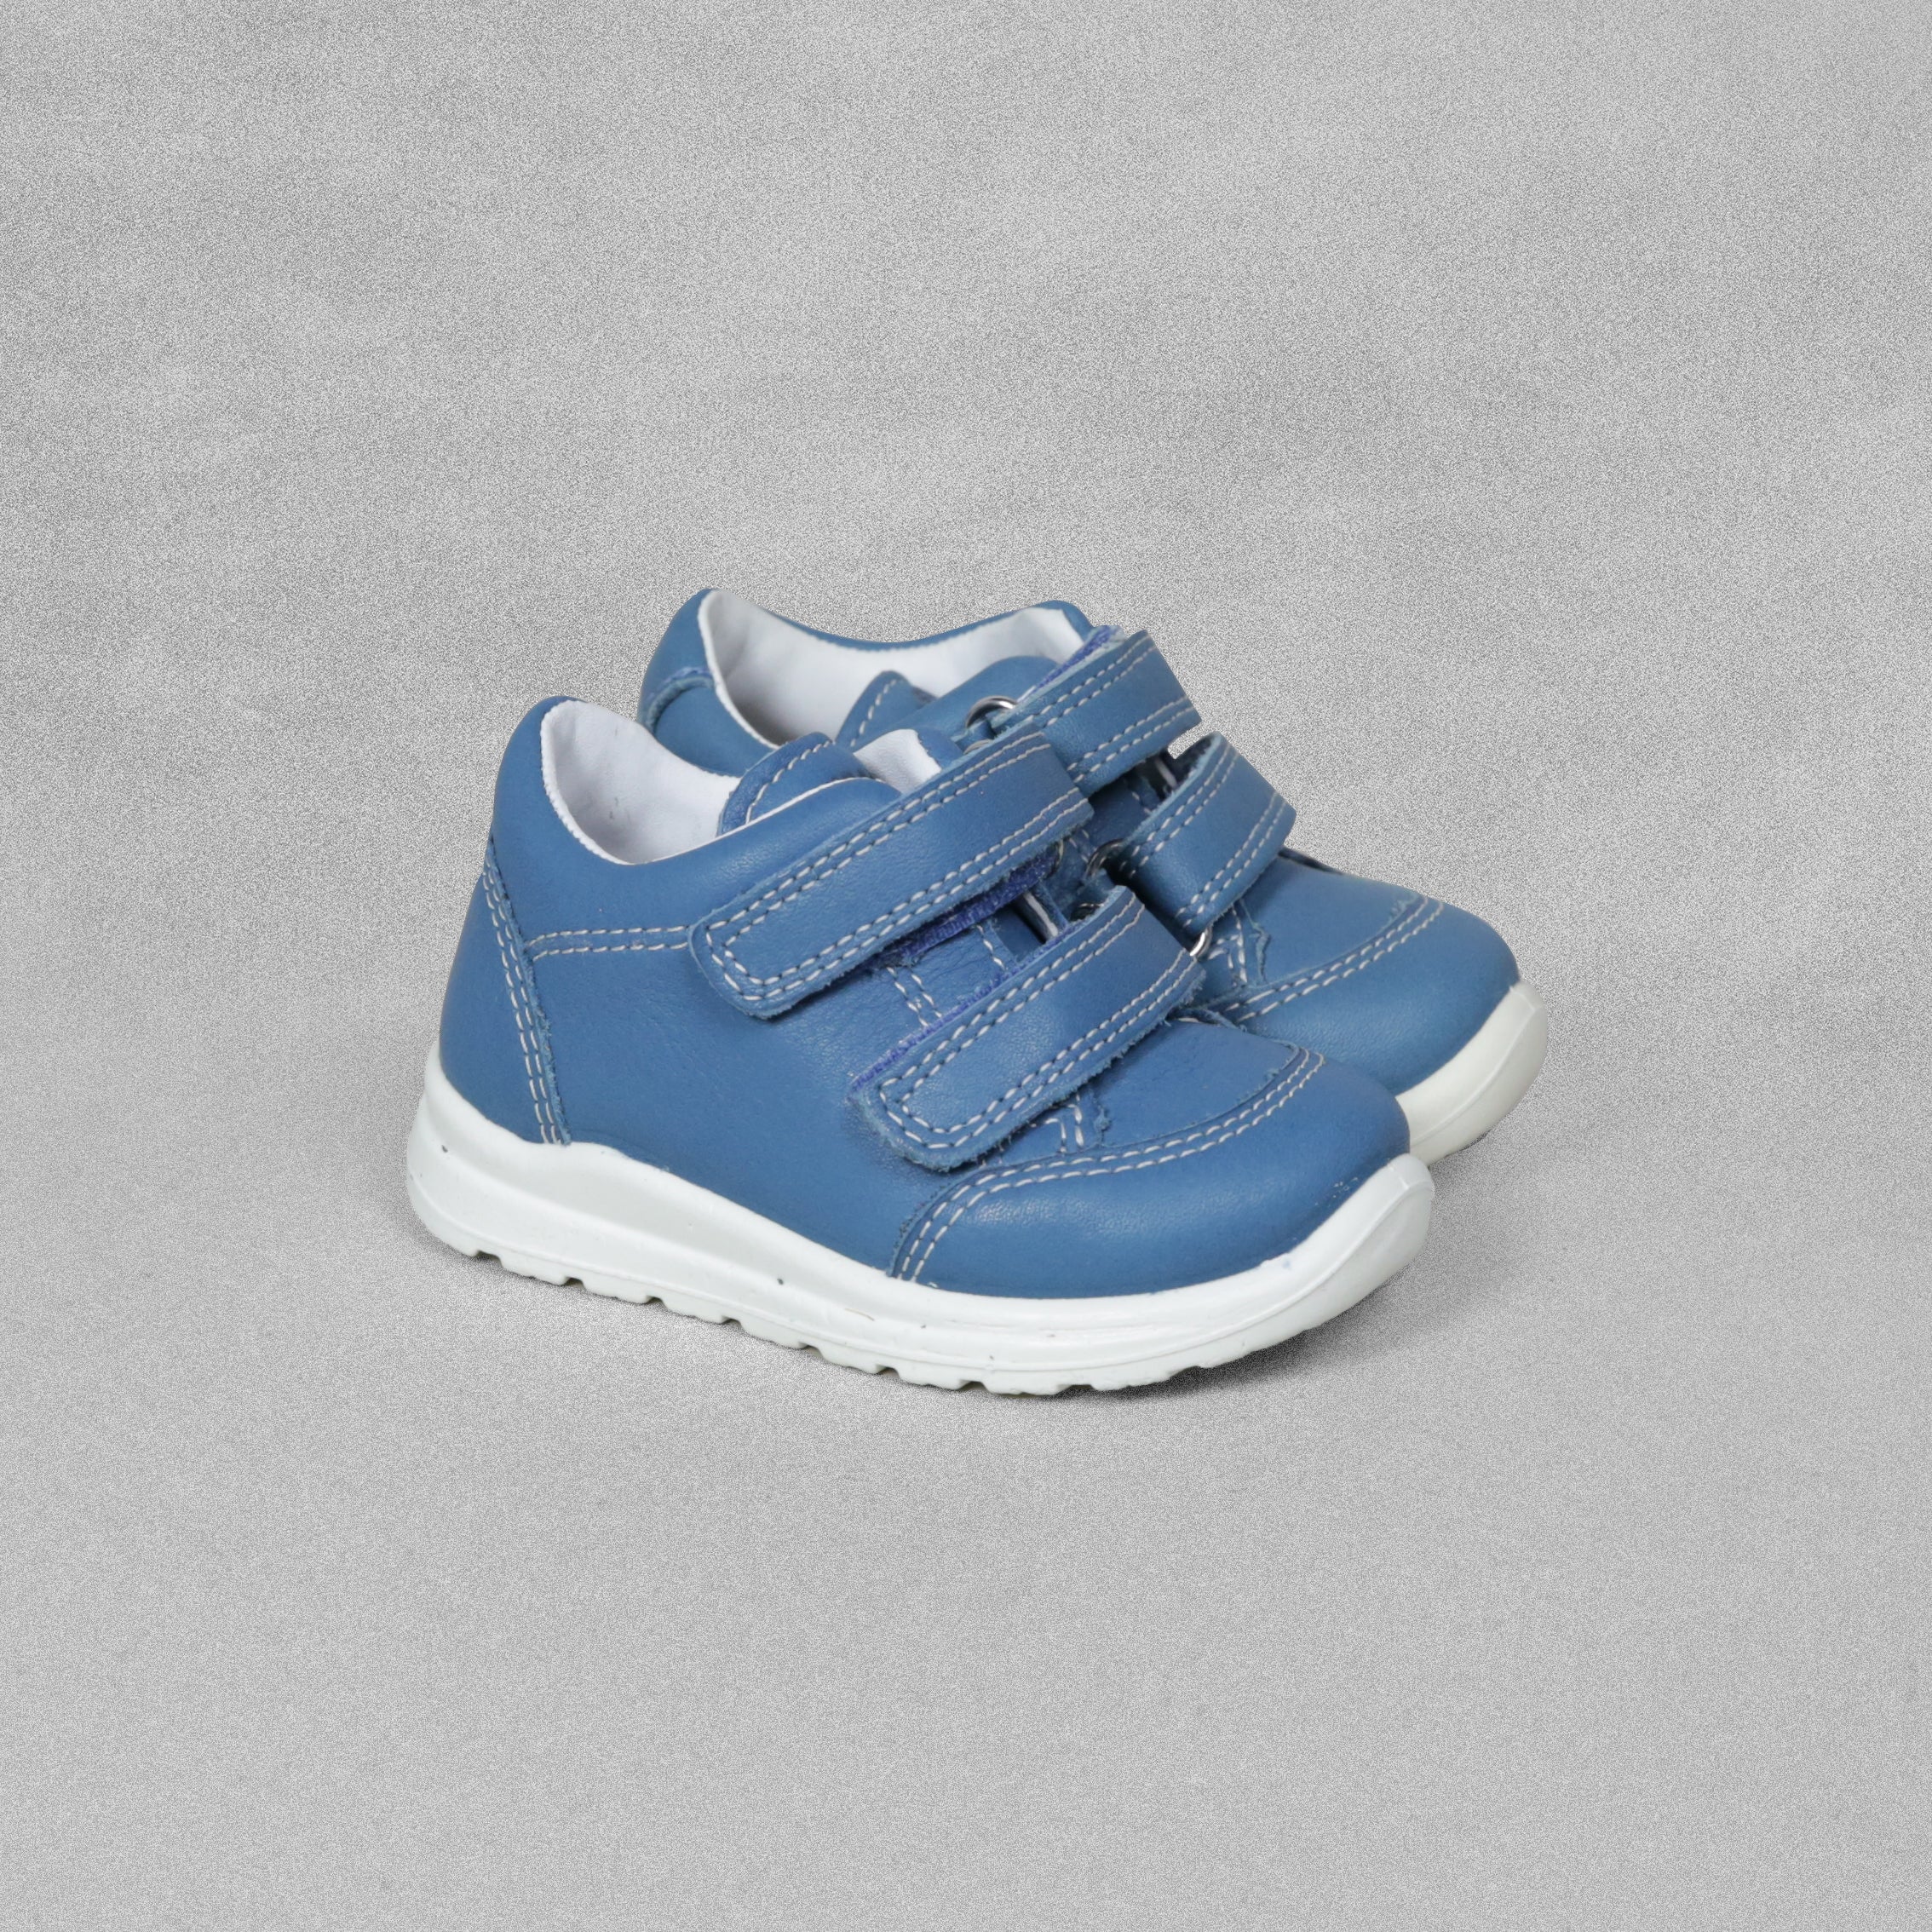 Superfit Baby Boys' Teal Blue Leather Shoe